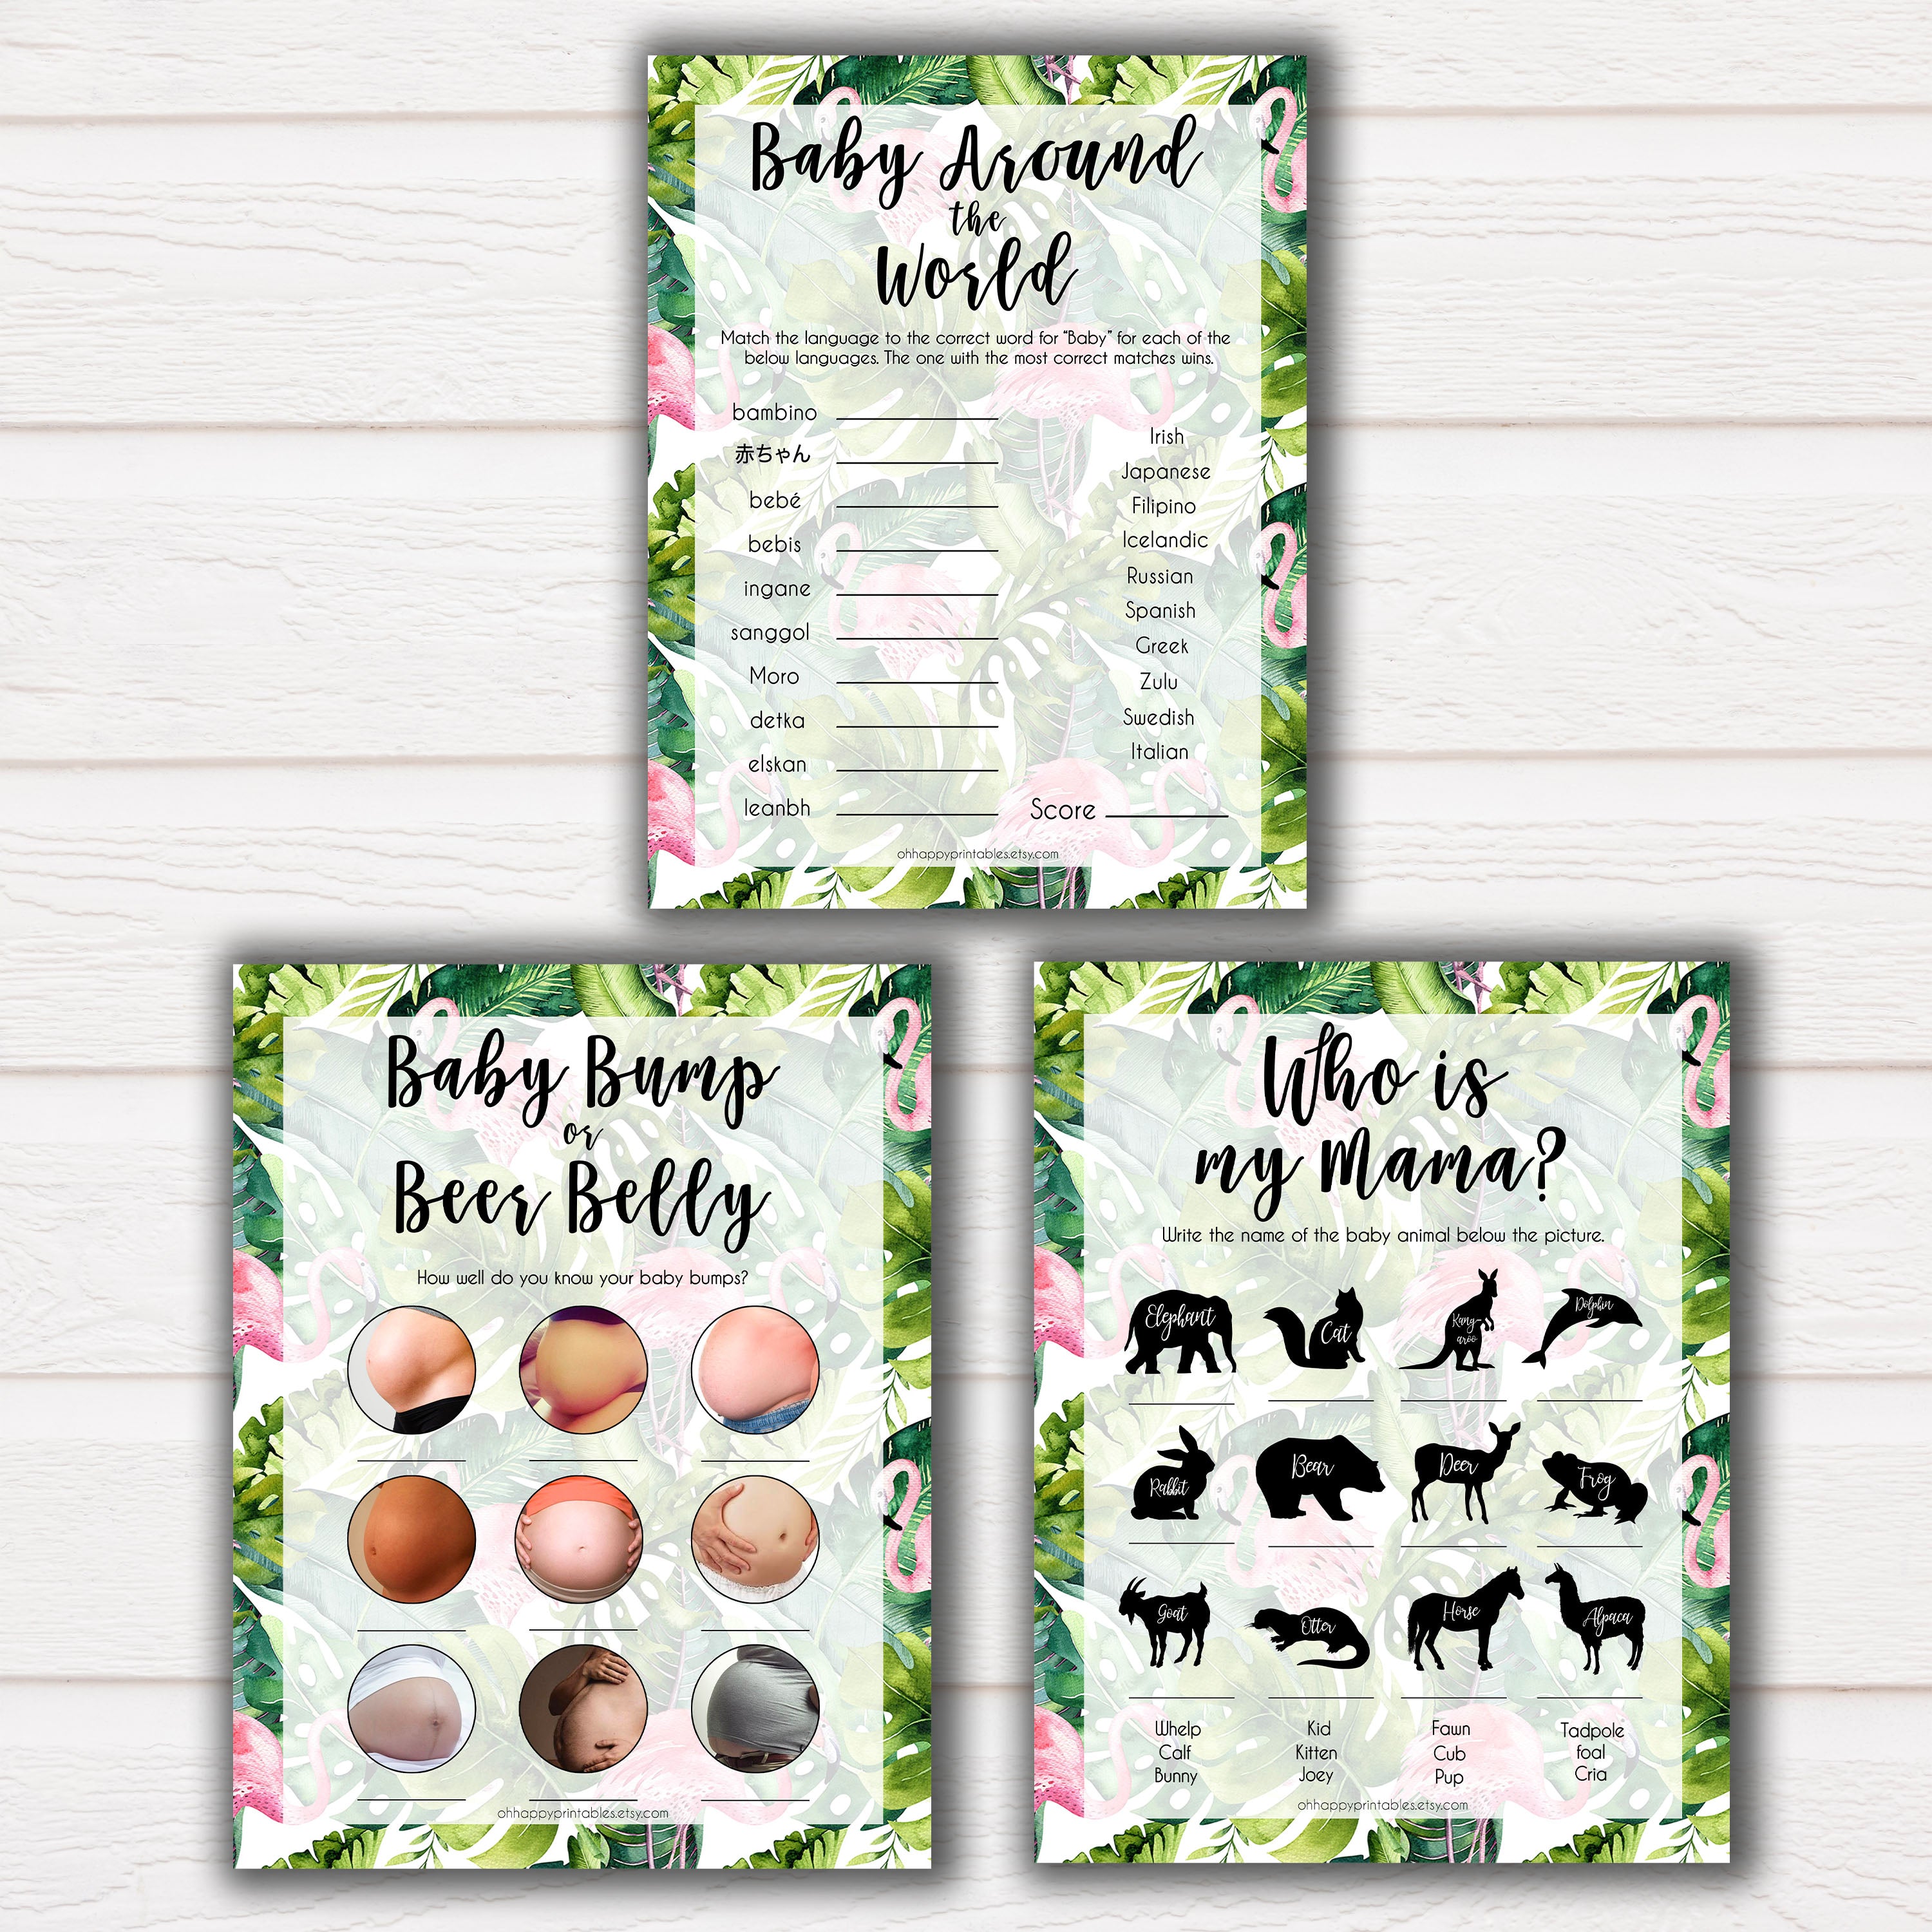 Tropical baby shower games, baby shower games bundle, Baby shower ideas, baby shower party games